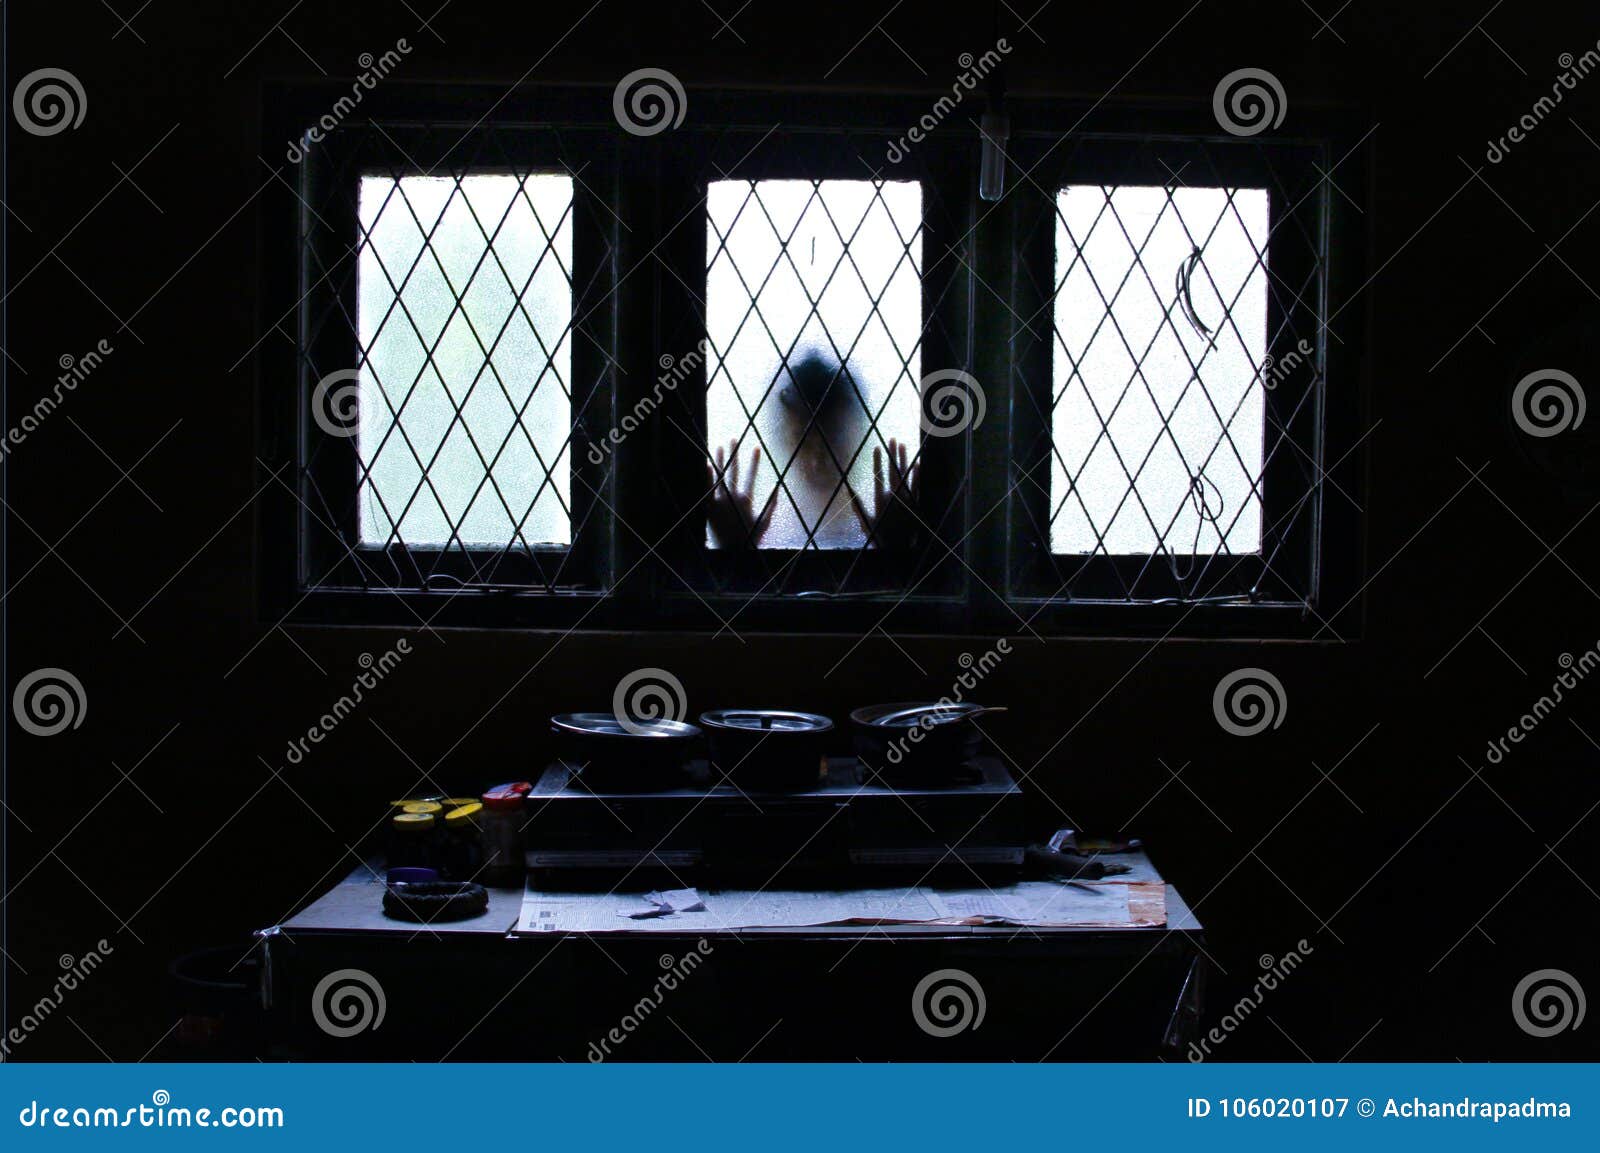 Man Peering Out Of A Window In The Dark Background, Picture Of The Man In The  Window Background Image And Wallpaper for Free Download